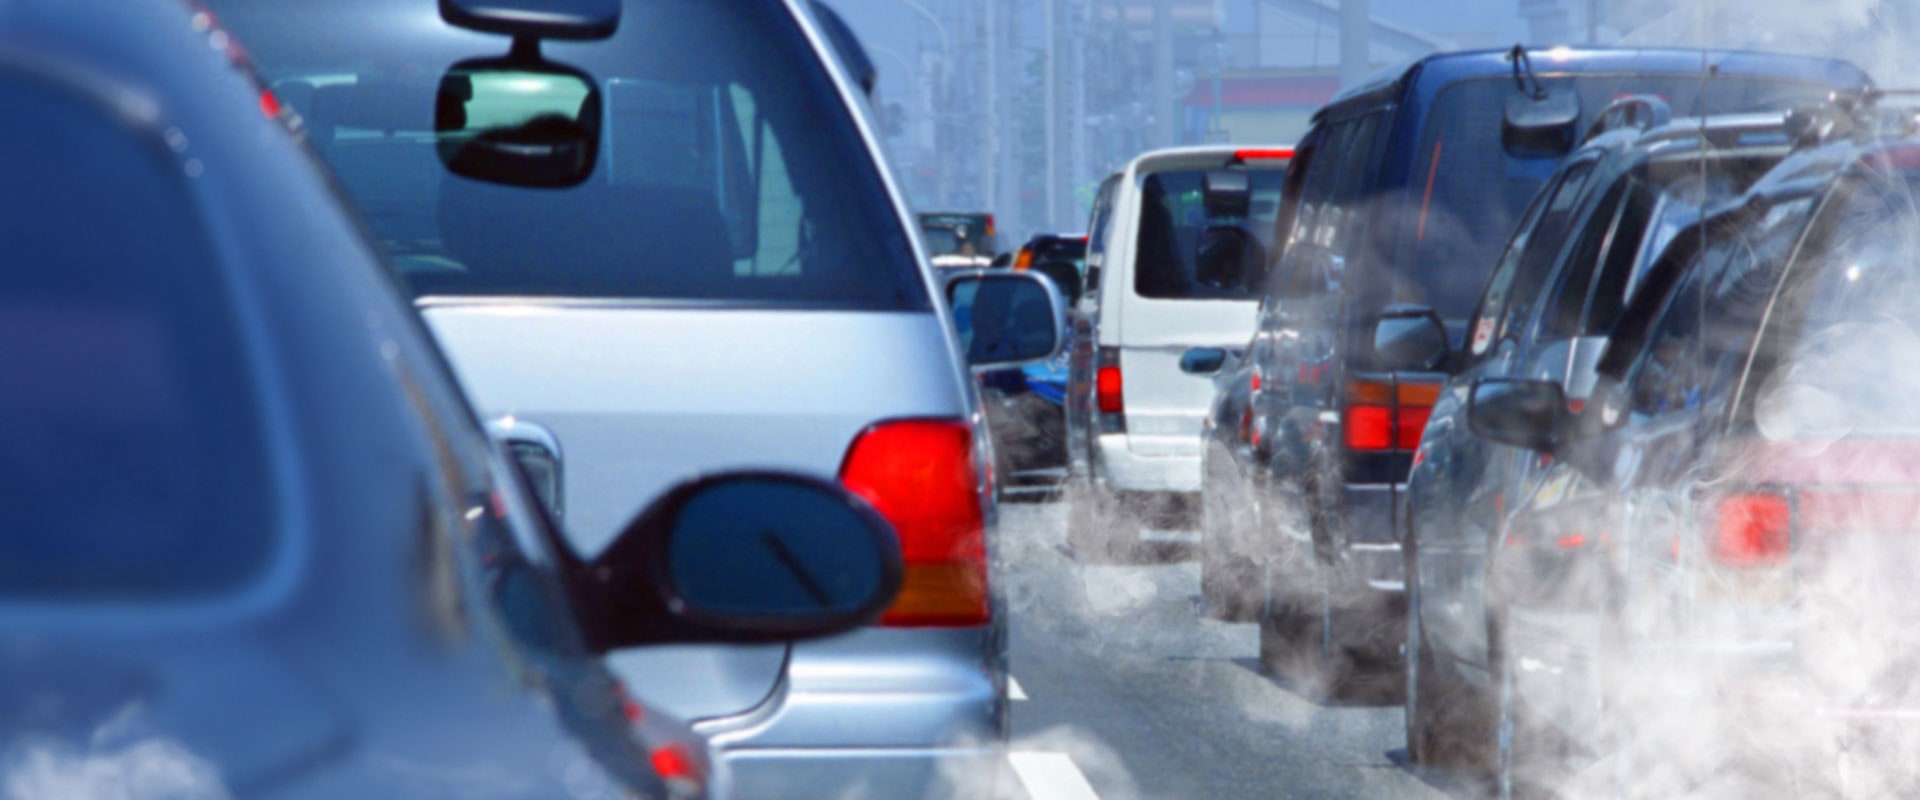 How does transportation affect the environment?